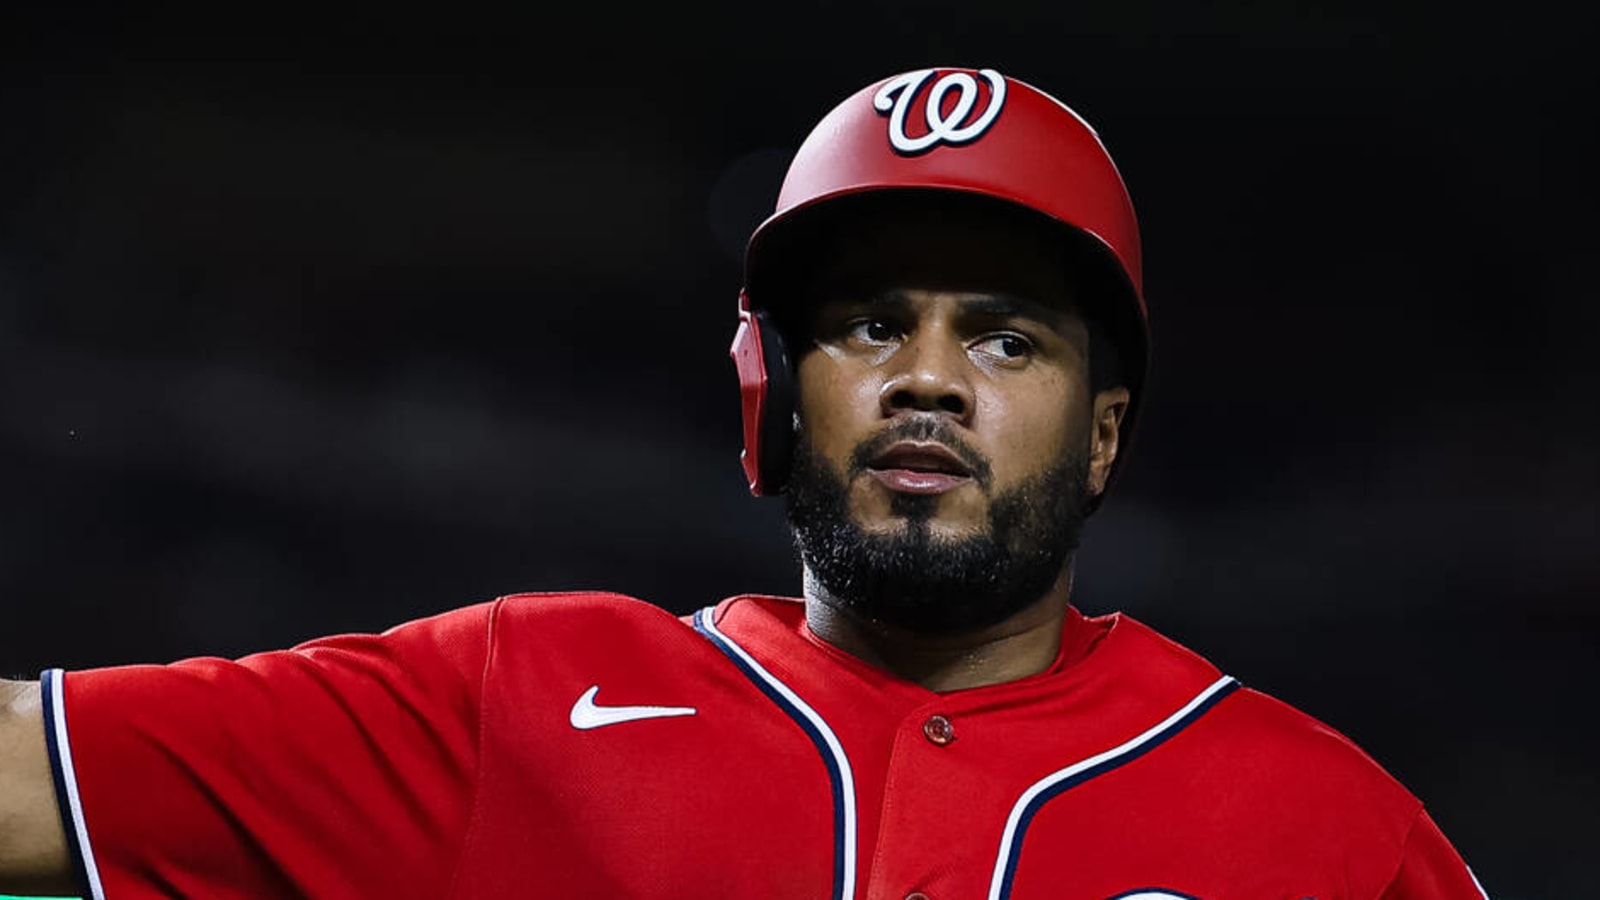 Cubs reverse course on plans, acquire Nationals 3B